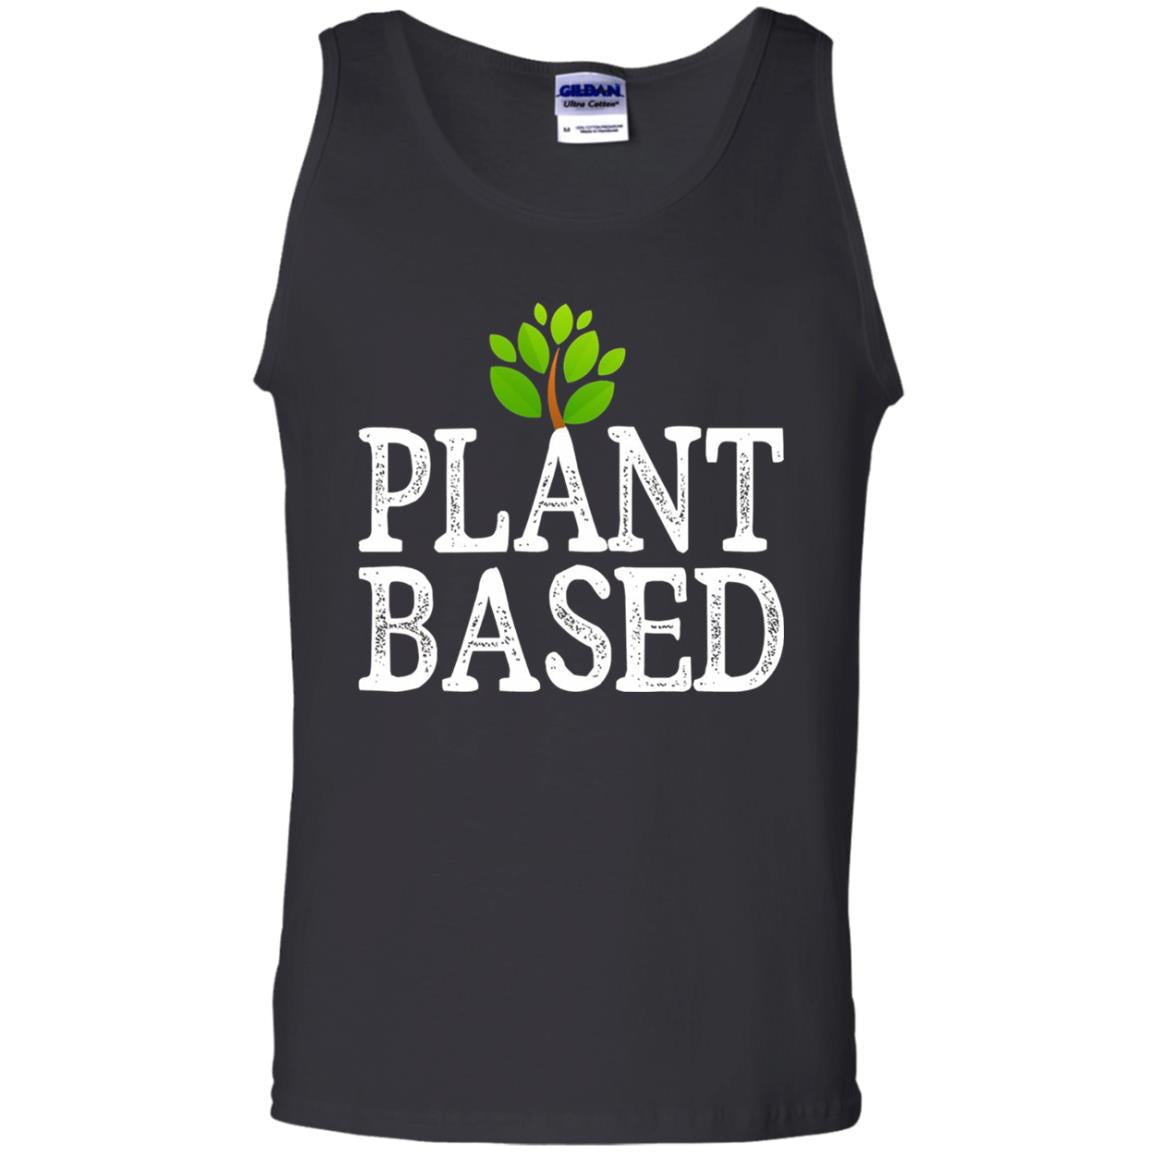 Plant Based Earth Day 2018 T-shirt